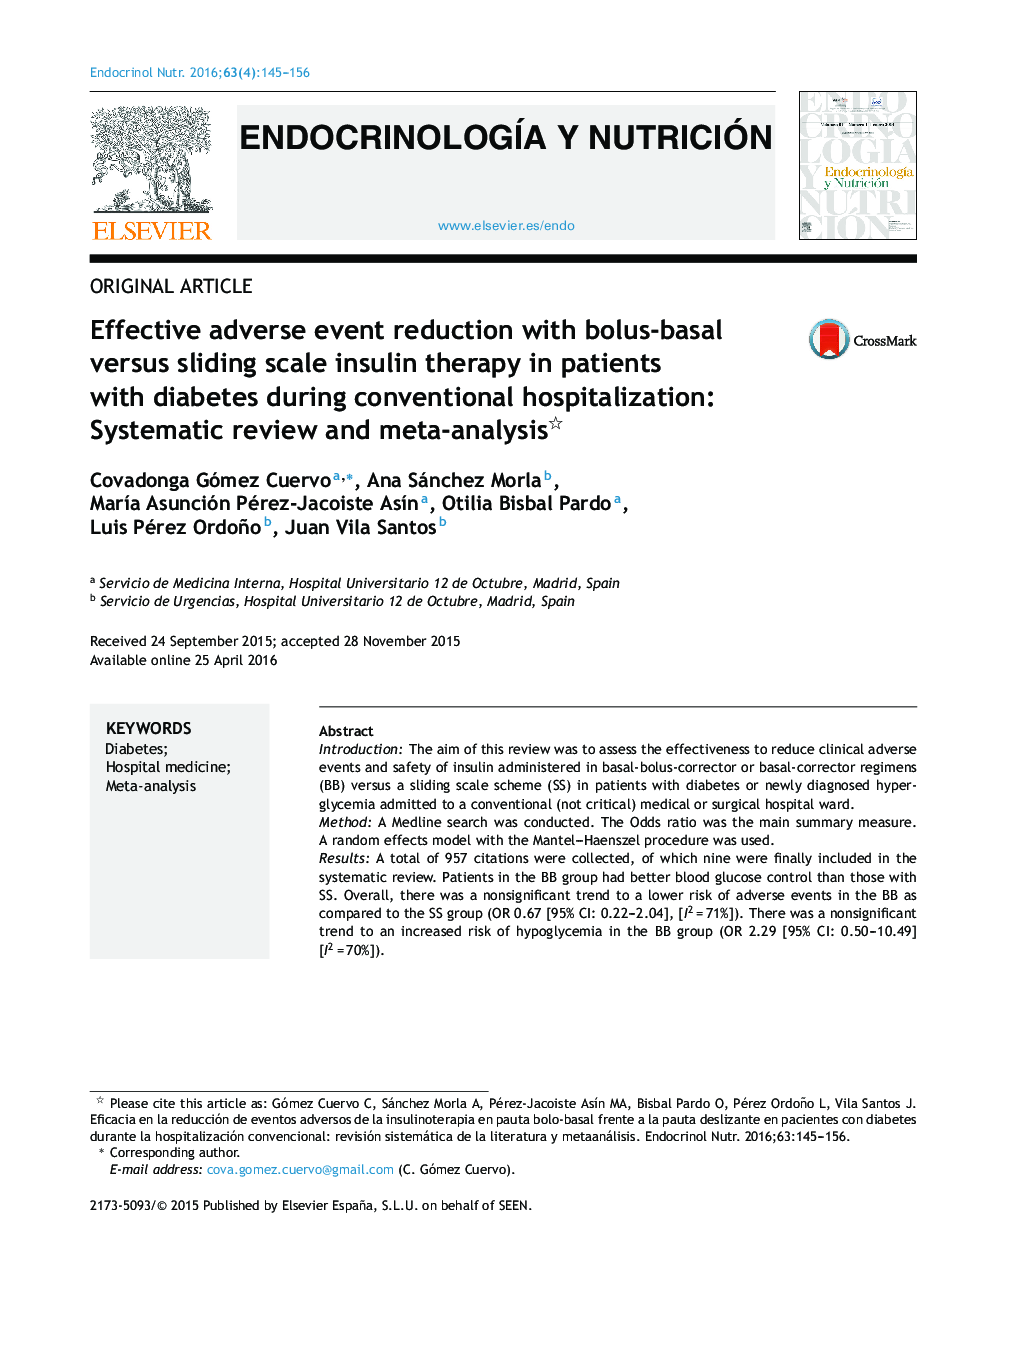 Effective adverse event reduction with bolus-basal versus sliding scale insulin therapy in patients with diabetes during conventional hospitalization: Systematic review and meta-analysis 